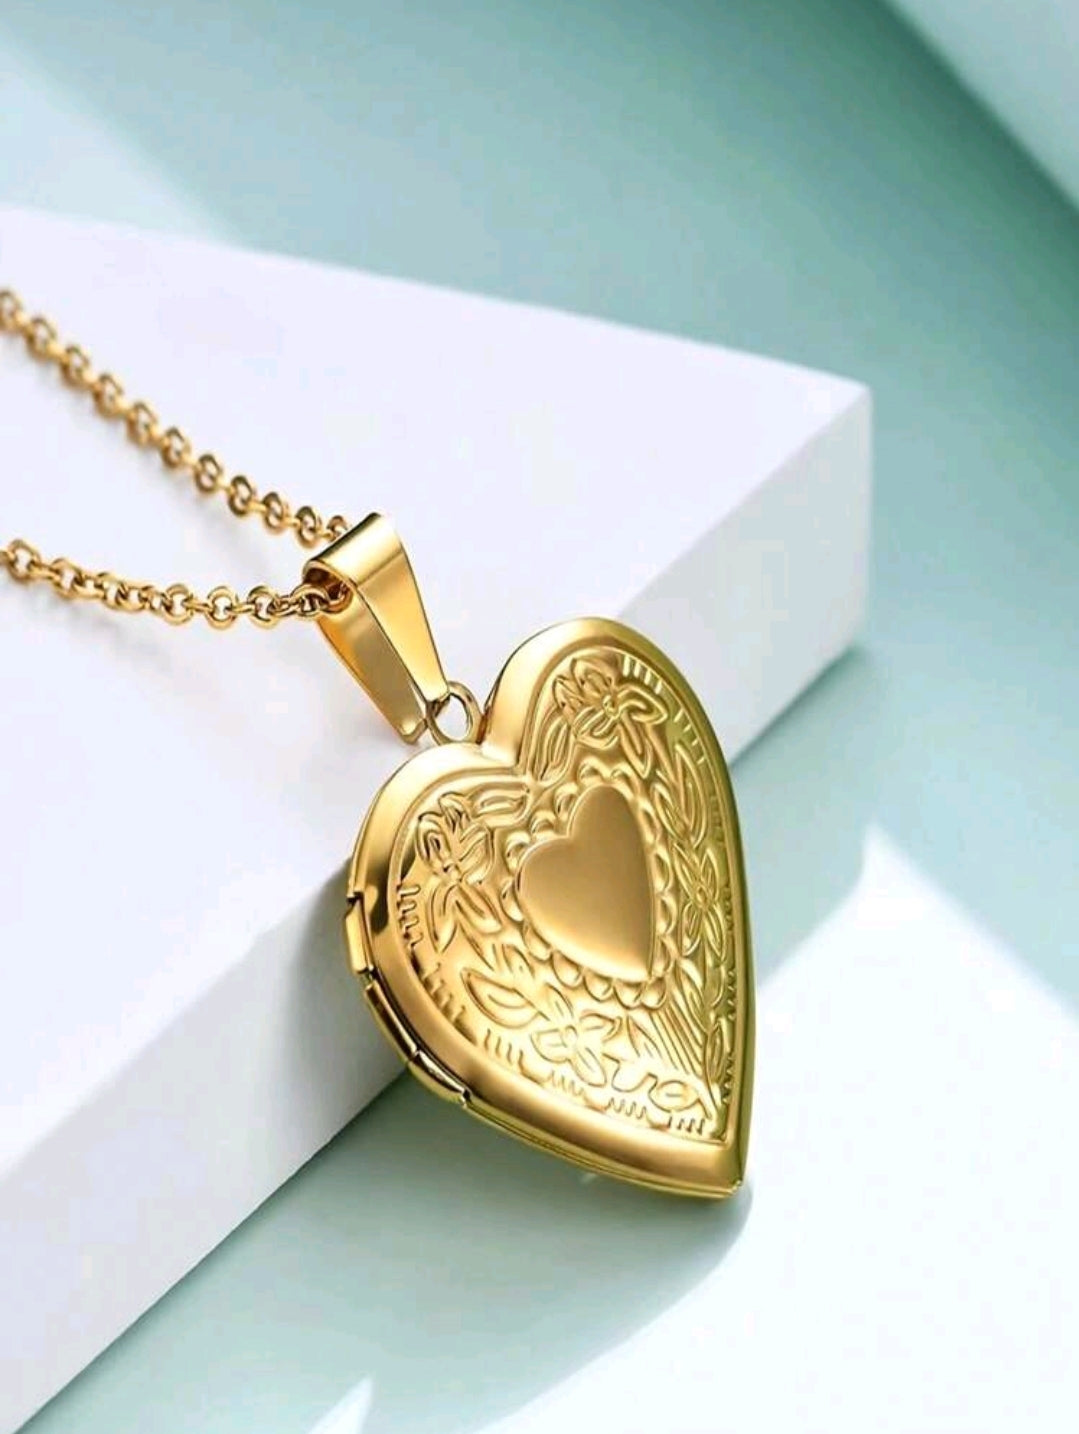 Stainless Steel Heart Locket Necklace